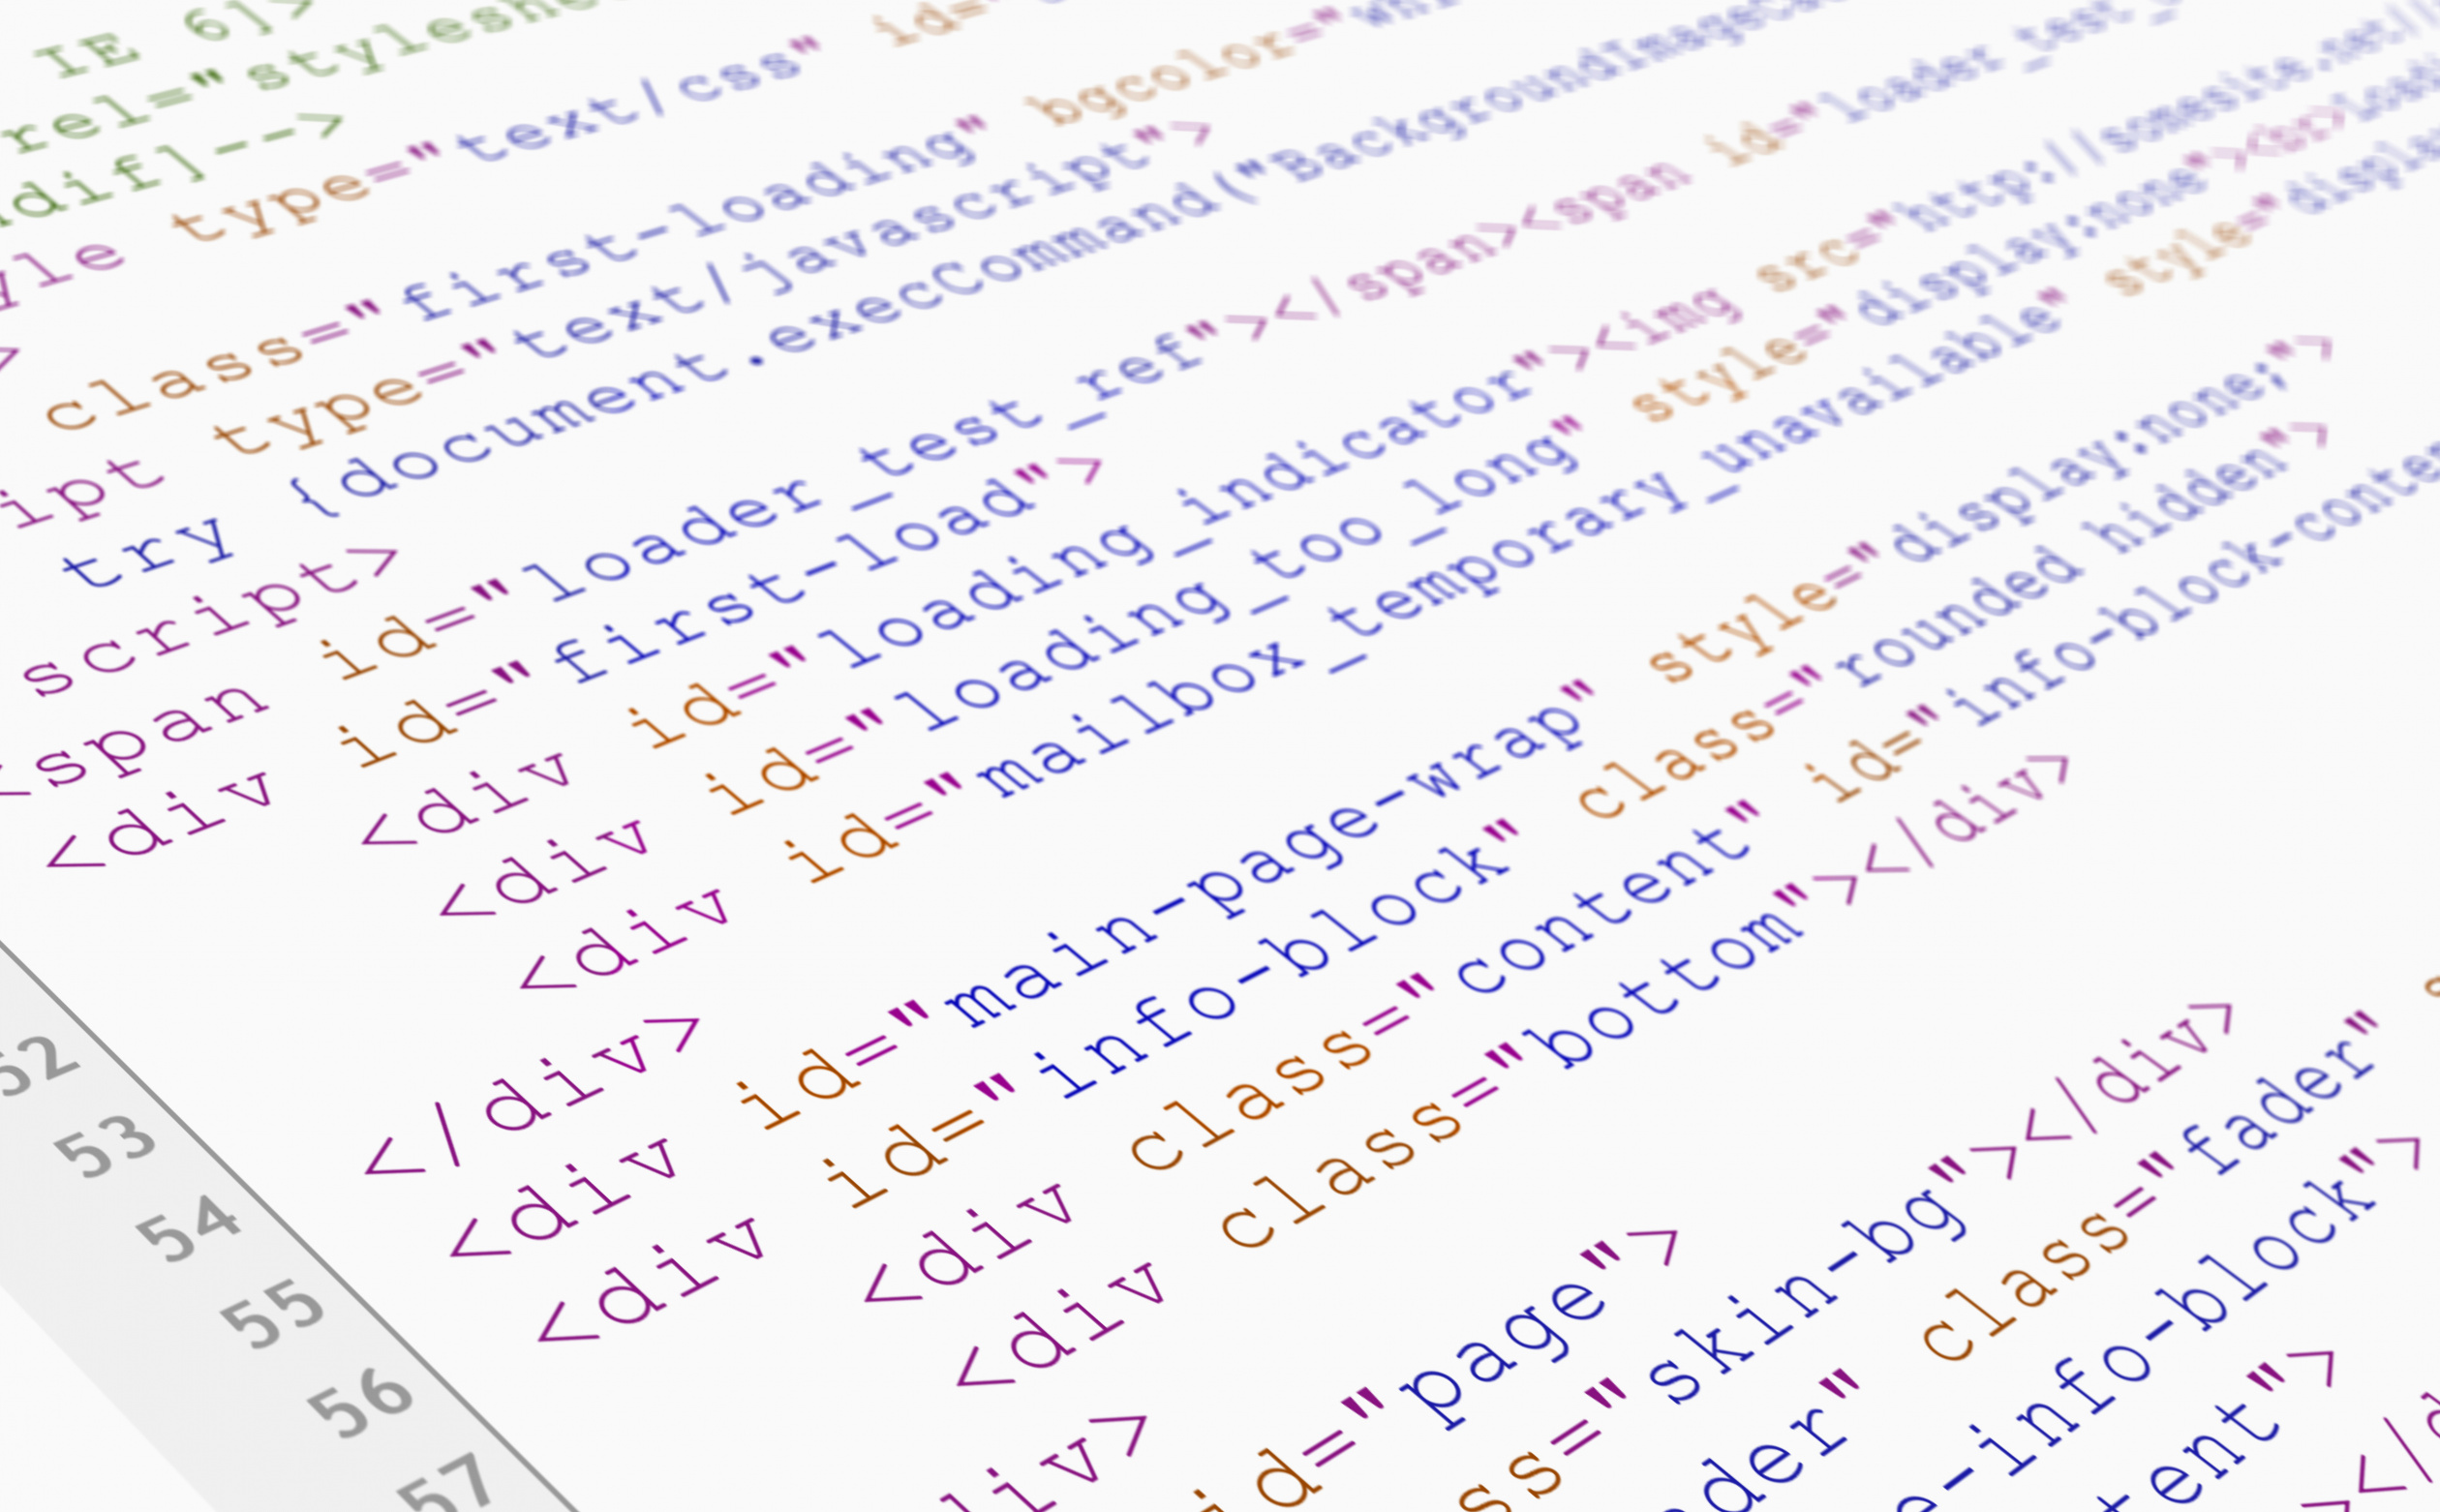 website-html-code-browser-view-printed-white-paper-closeup-view.jpg